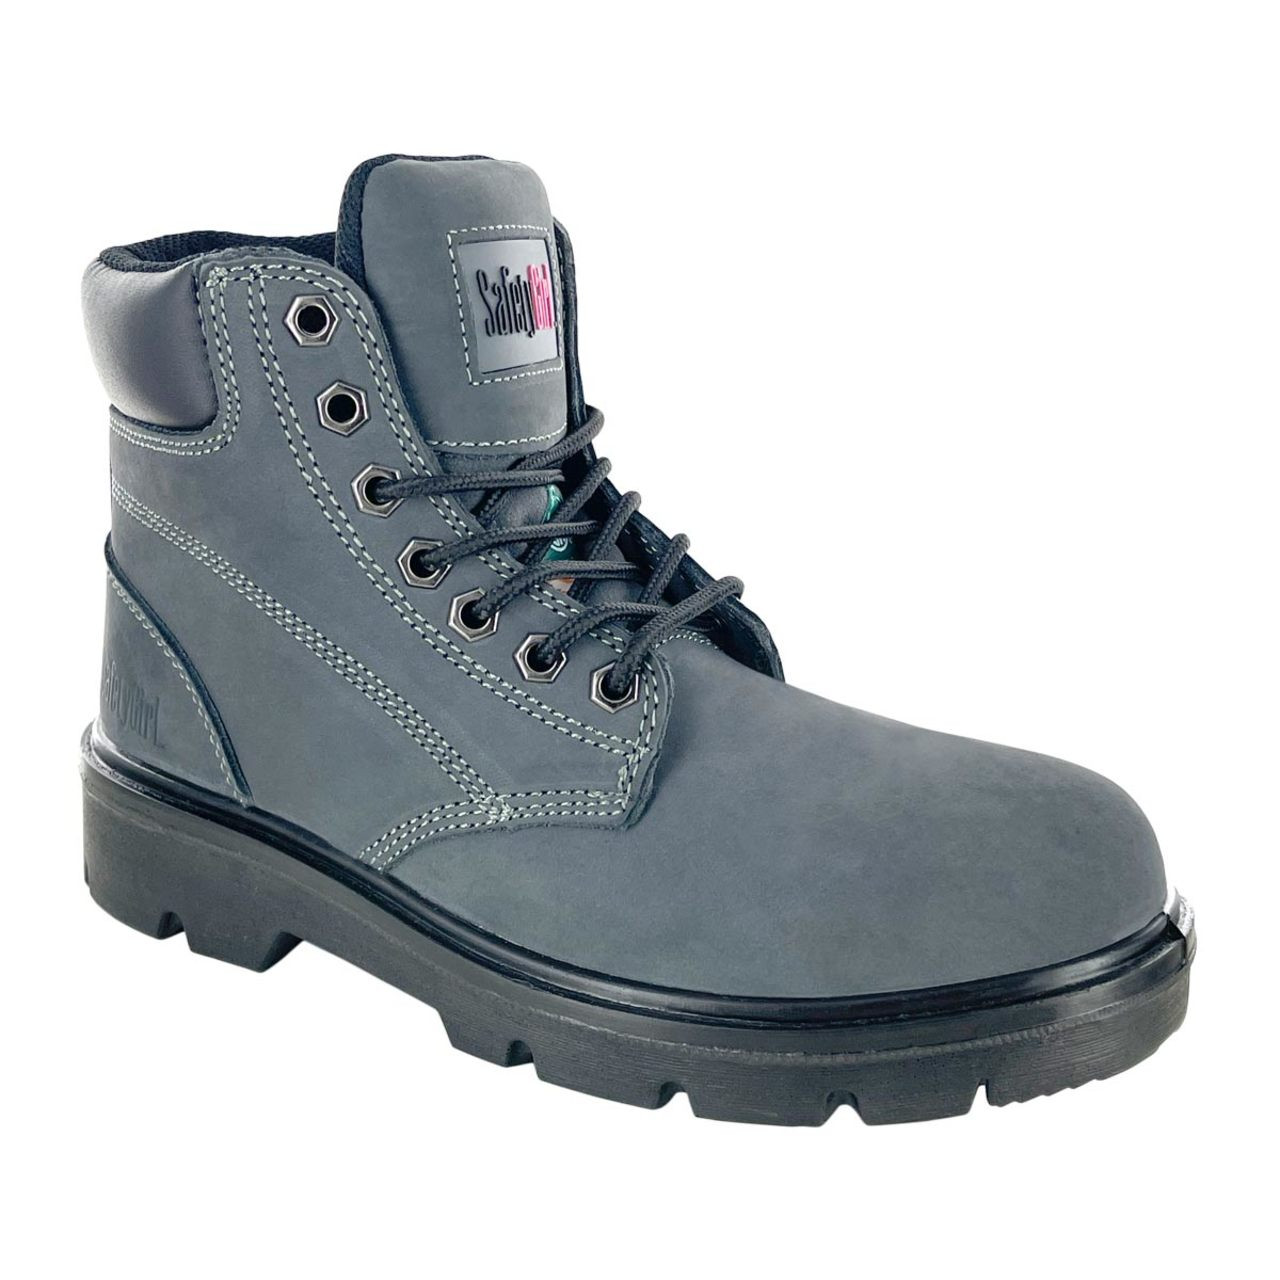 Image of Safety Girl Women's Somerset Gray 6" Waterproof EH PR Steel Toe Boots - 15501-GRY